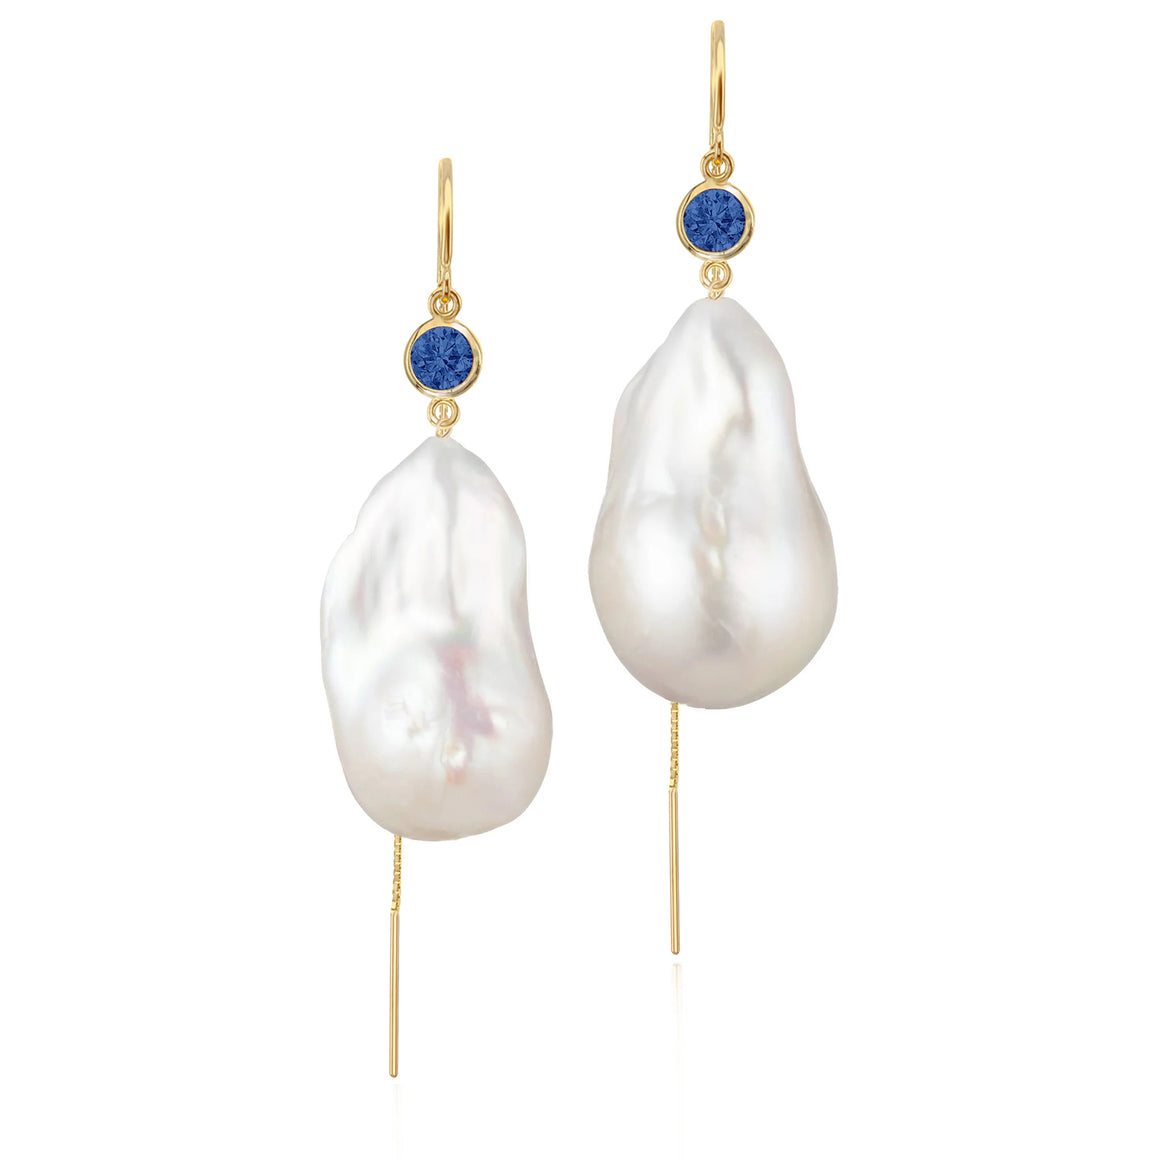 Blue Sapphire And Large Baroque Freshwater Pearl Drop Threader Earrings In 14K Yellow Gold